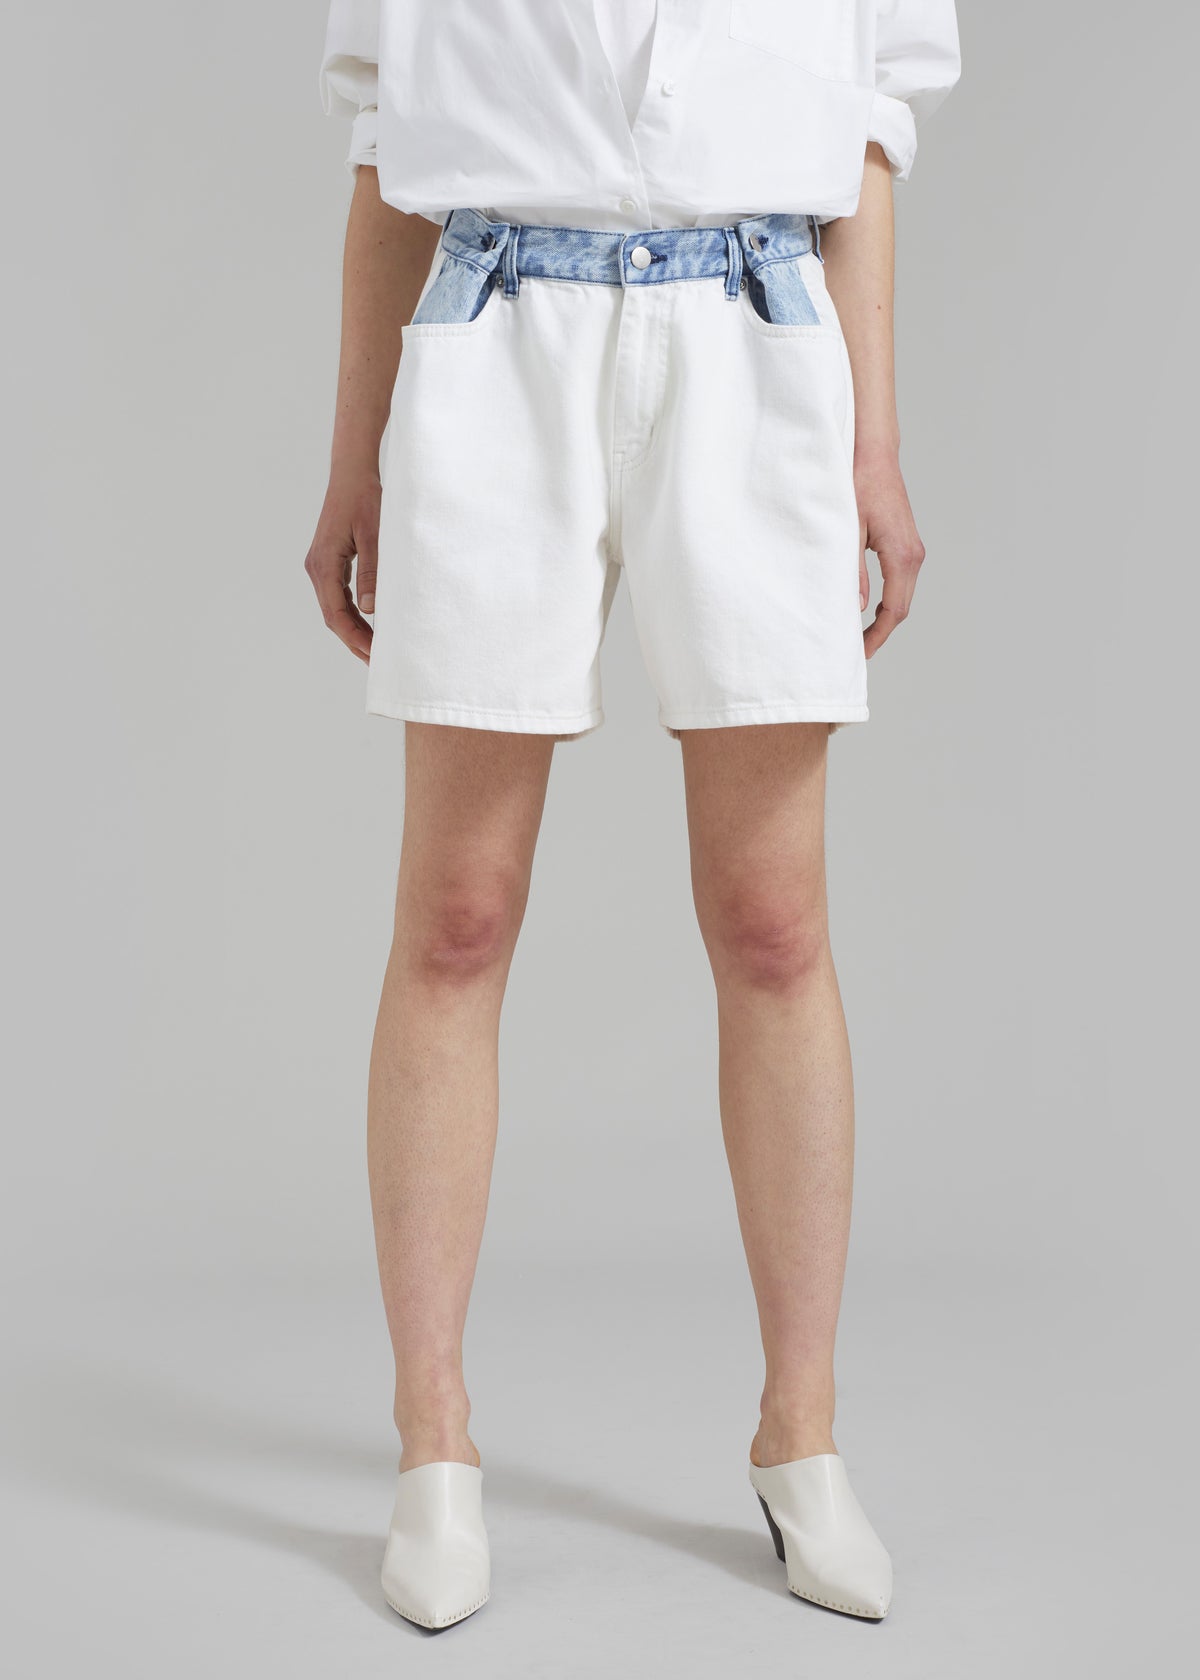 receive - Shorts Frankie the larger more Hayla The discount Shop Contrast Off White/Blue you Denim The you buy, will